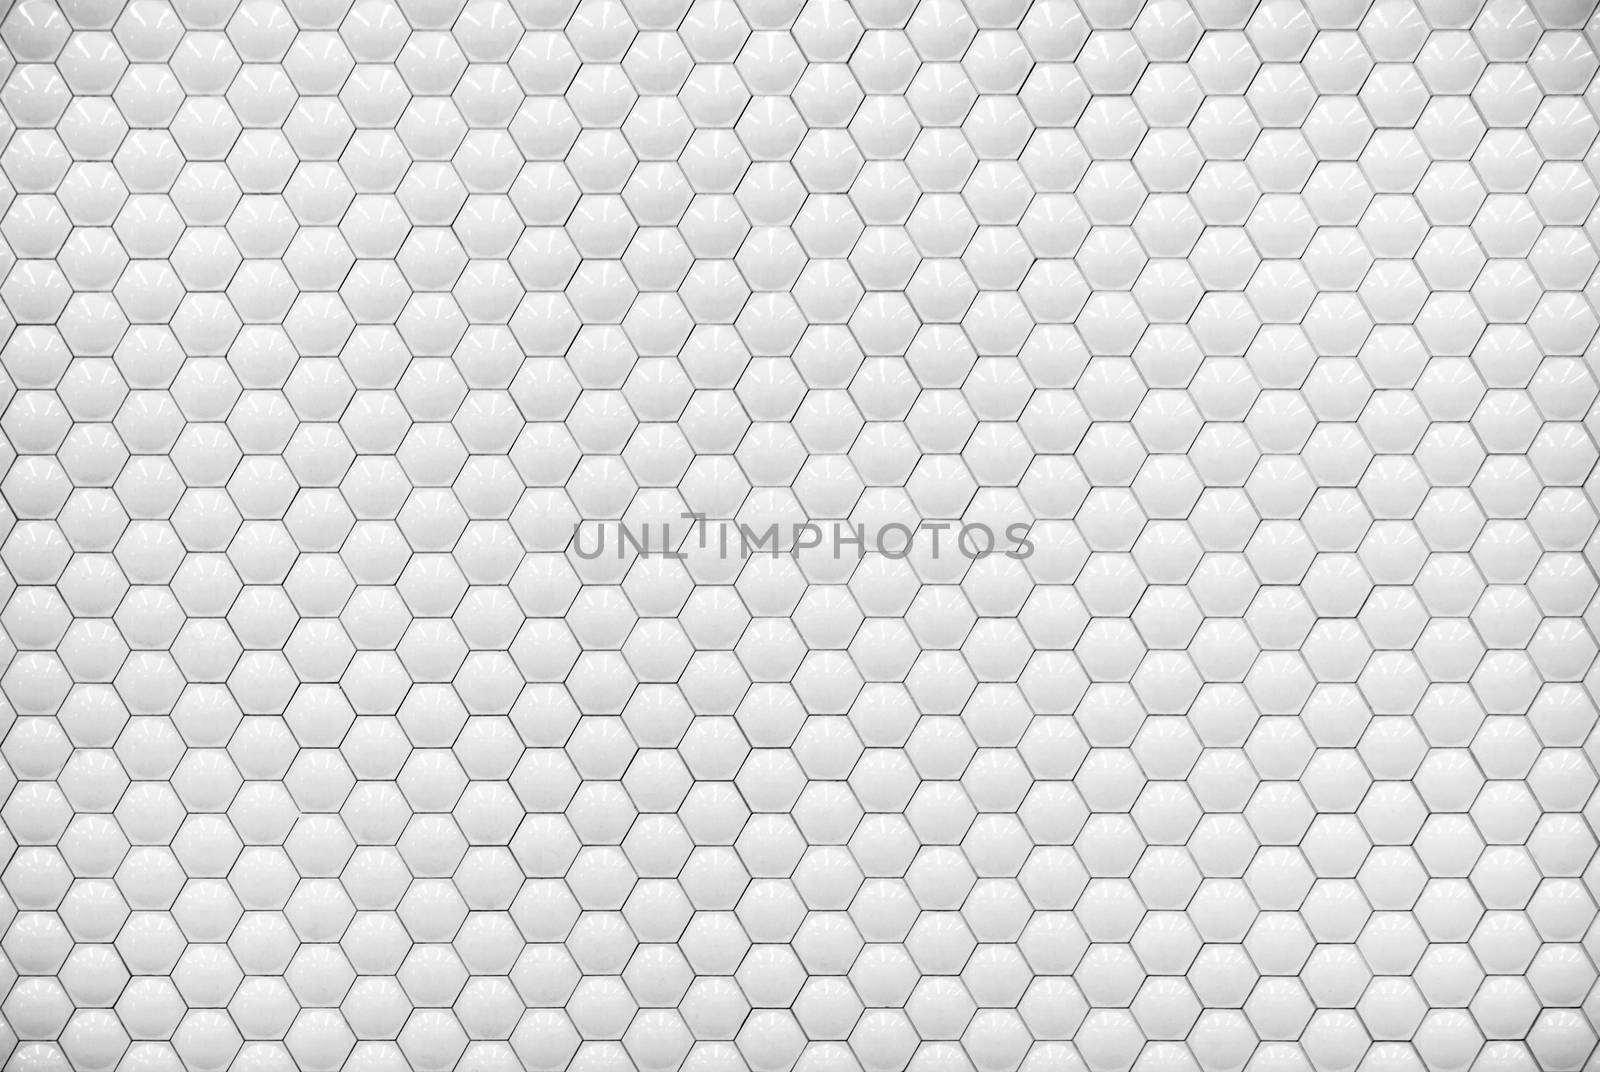 White shiny hexagon bubble tile texture background by keneaster